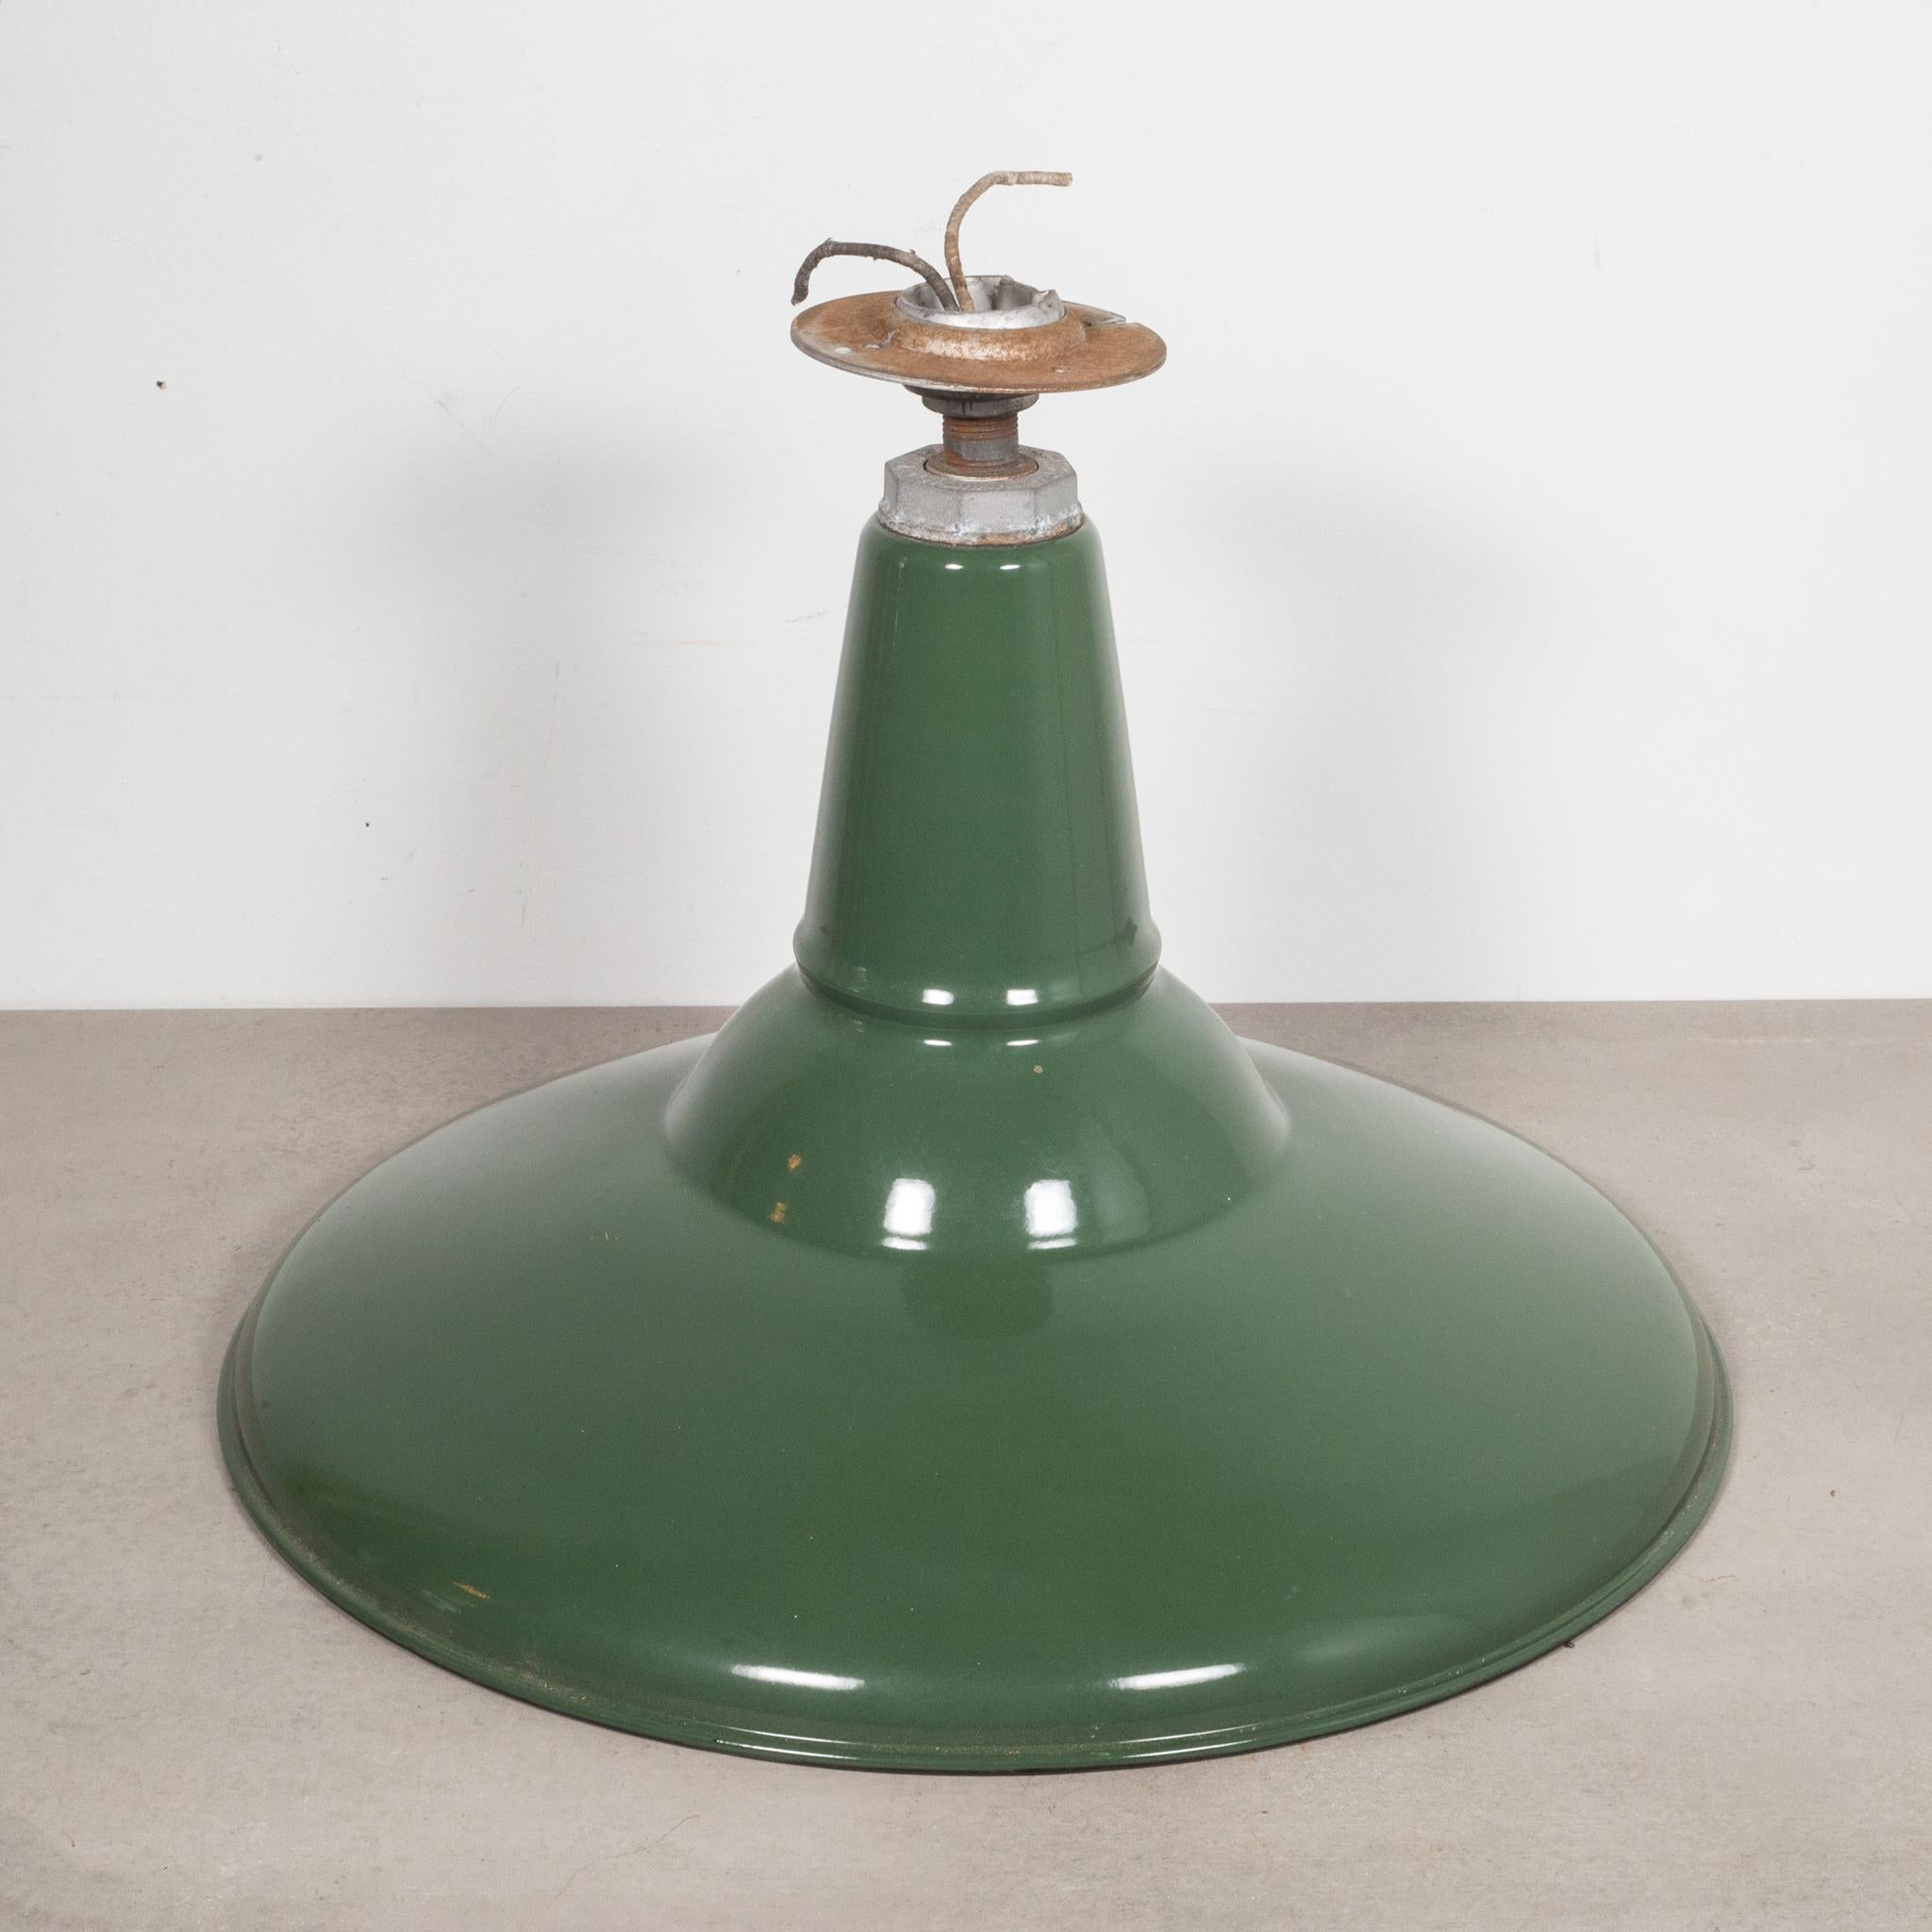 About

These are original large green enameled pendants with white porcelain interior and metal swivel joint canopies.

Price is per piece. Contact us for more shipping options: S16 Home San Francisco

Creator Benjamin Electric Mfg., Chicago.
Date